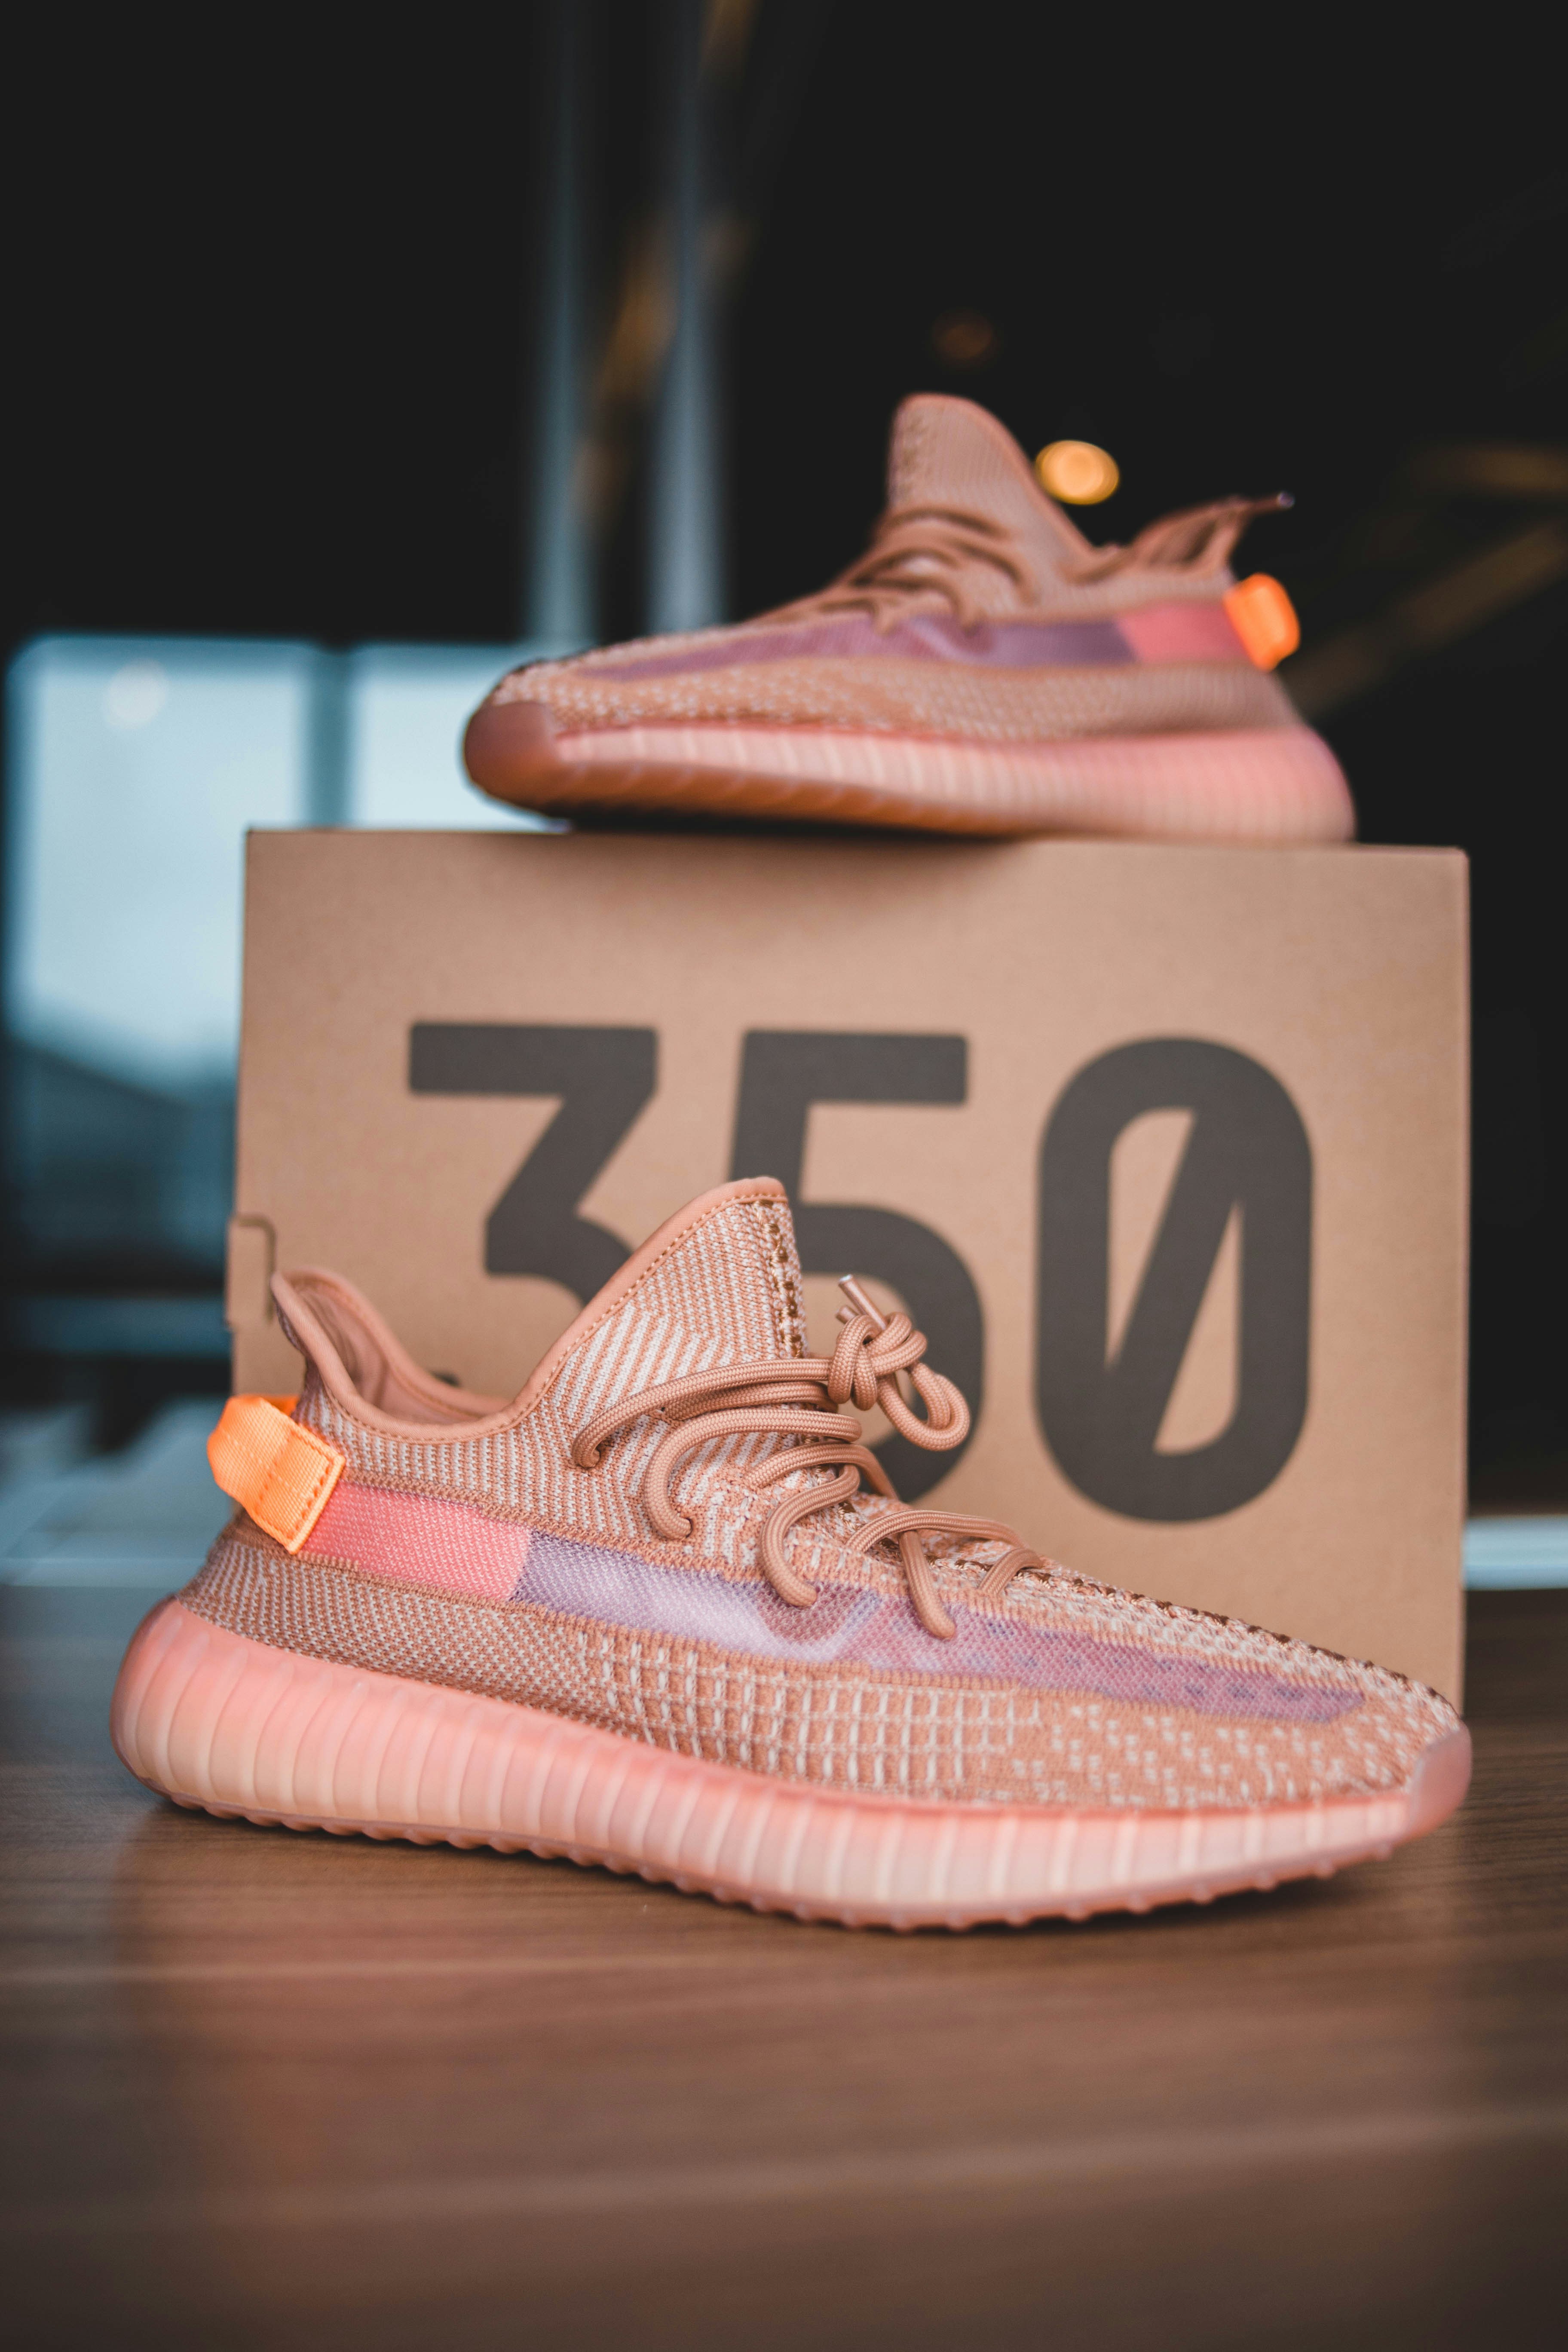 yeezy pink and grey